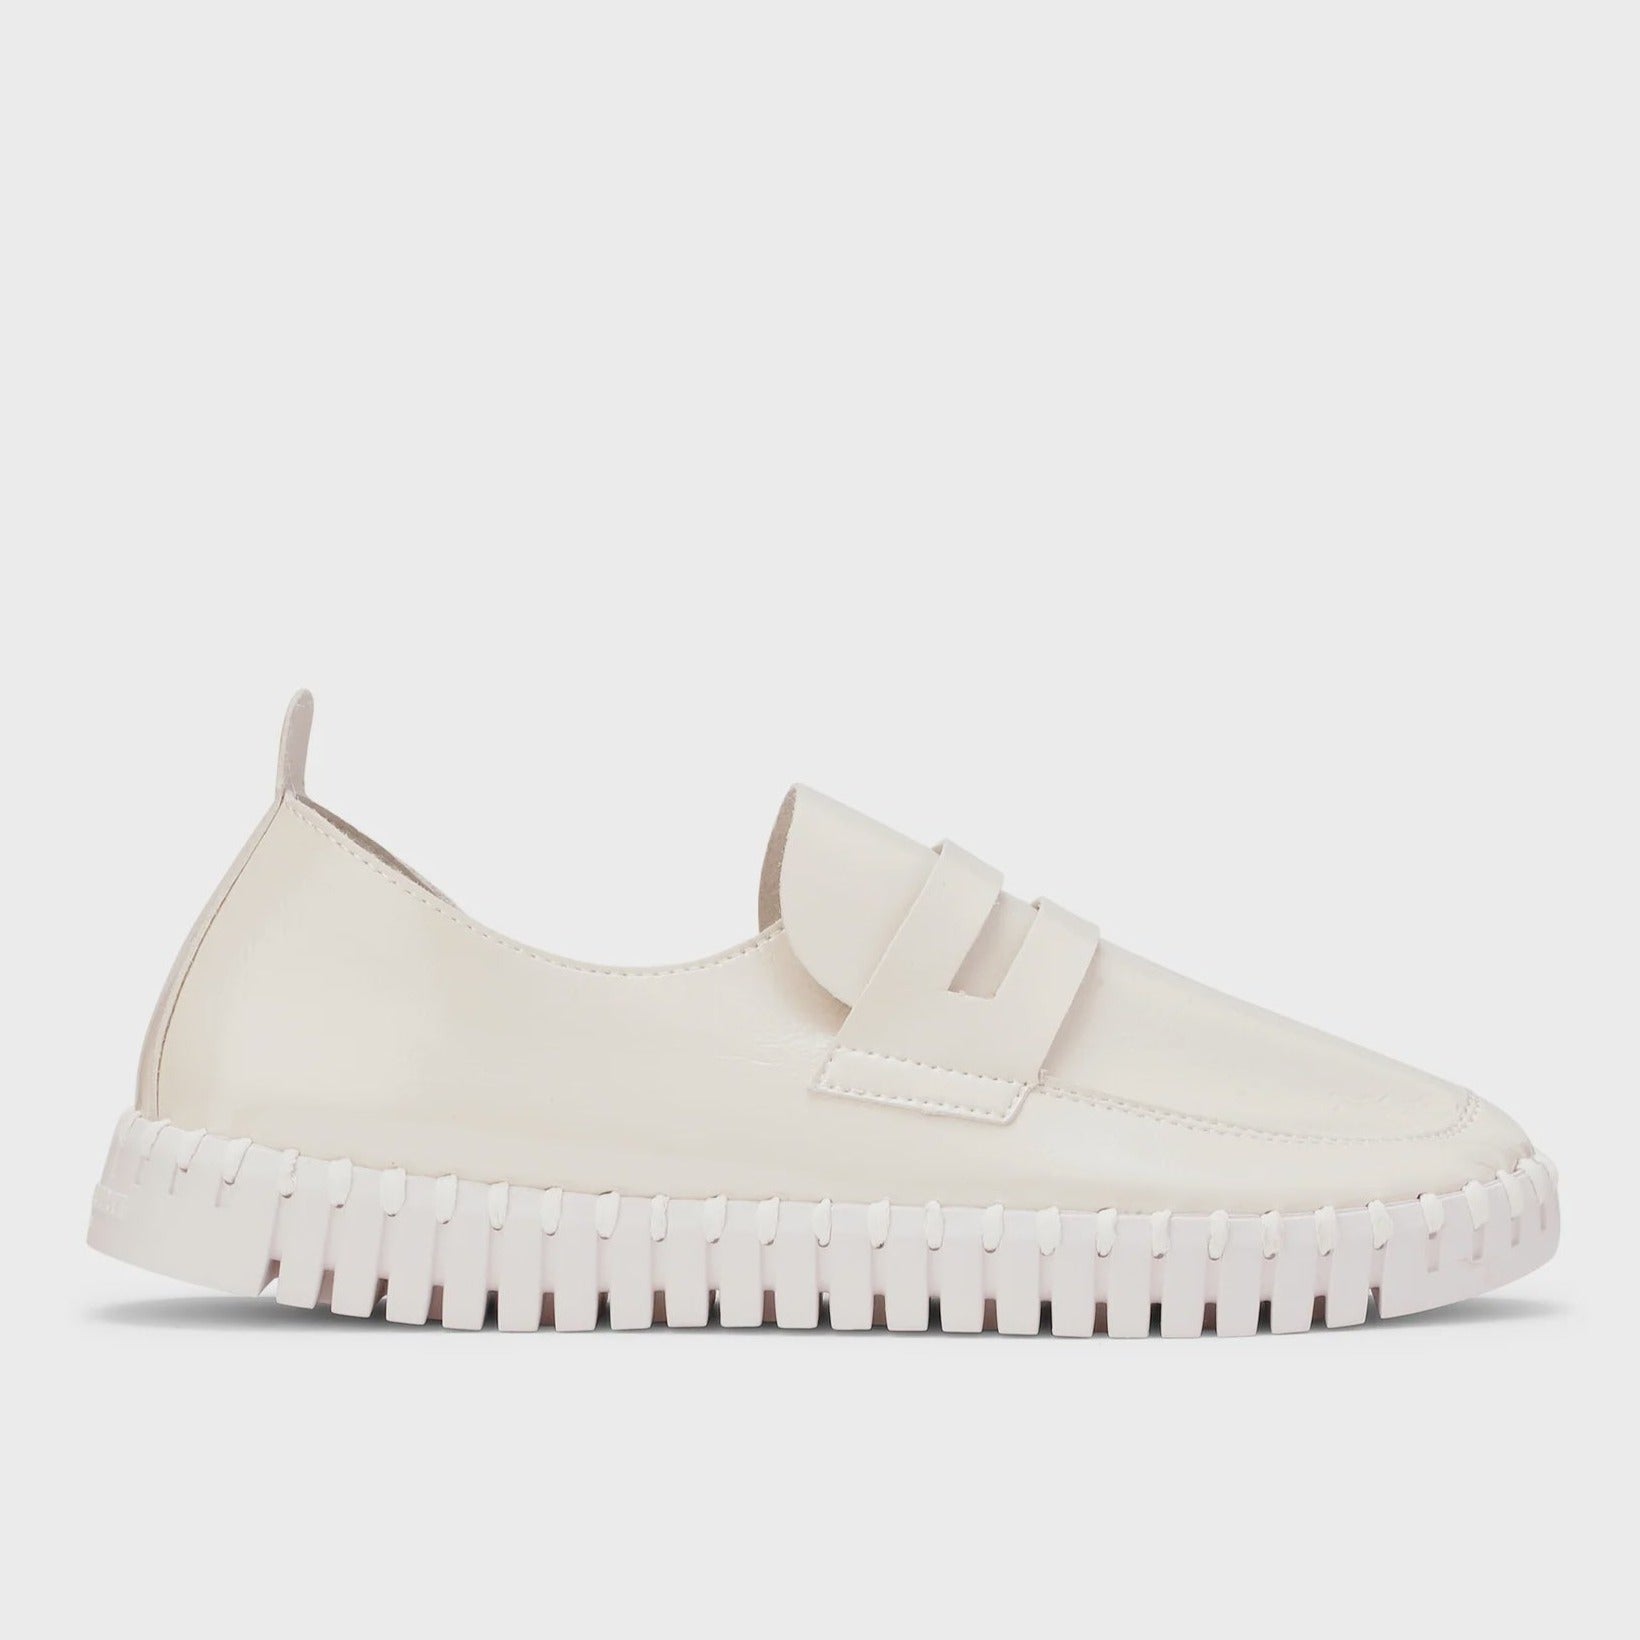 ILSE JACOBSEN - TULIP LOAFER FLAT 121 IN MILK CREME PATENT LEATHER